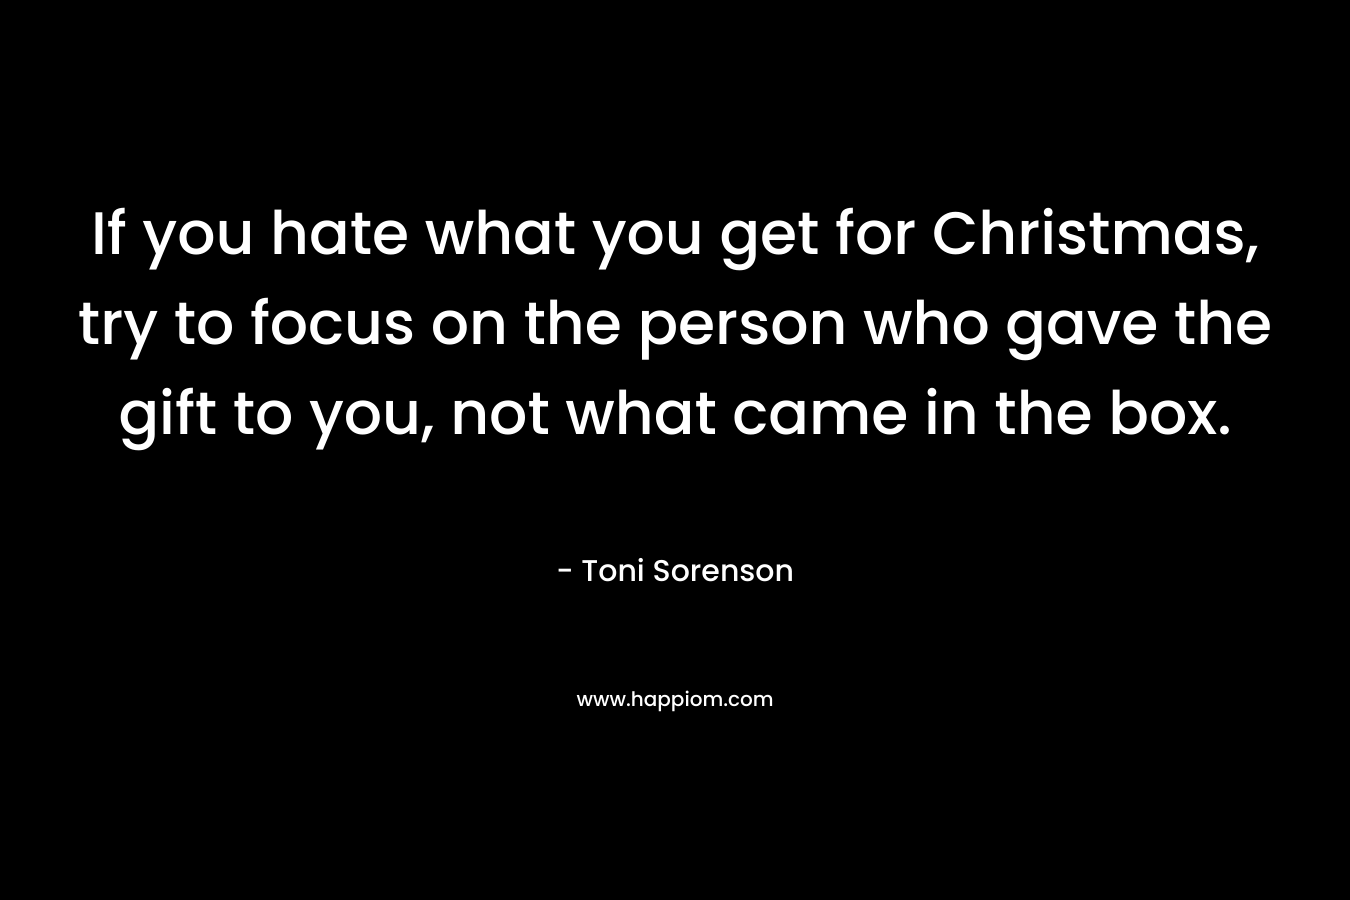 If you hate what you get for Christmas, try to focus on the person who gave the gift to you, not what came in the box. – Toni Sorenson